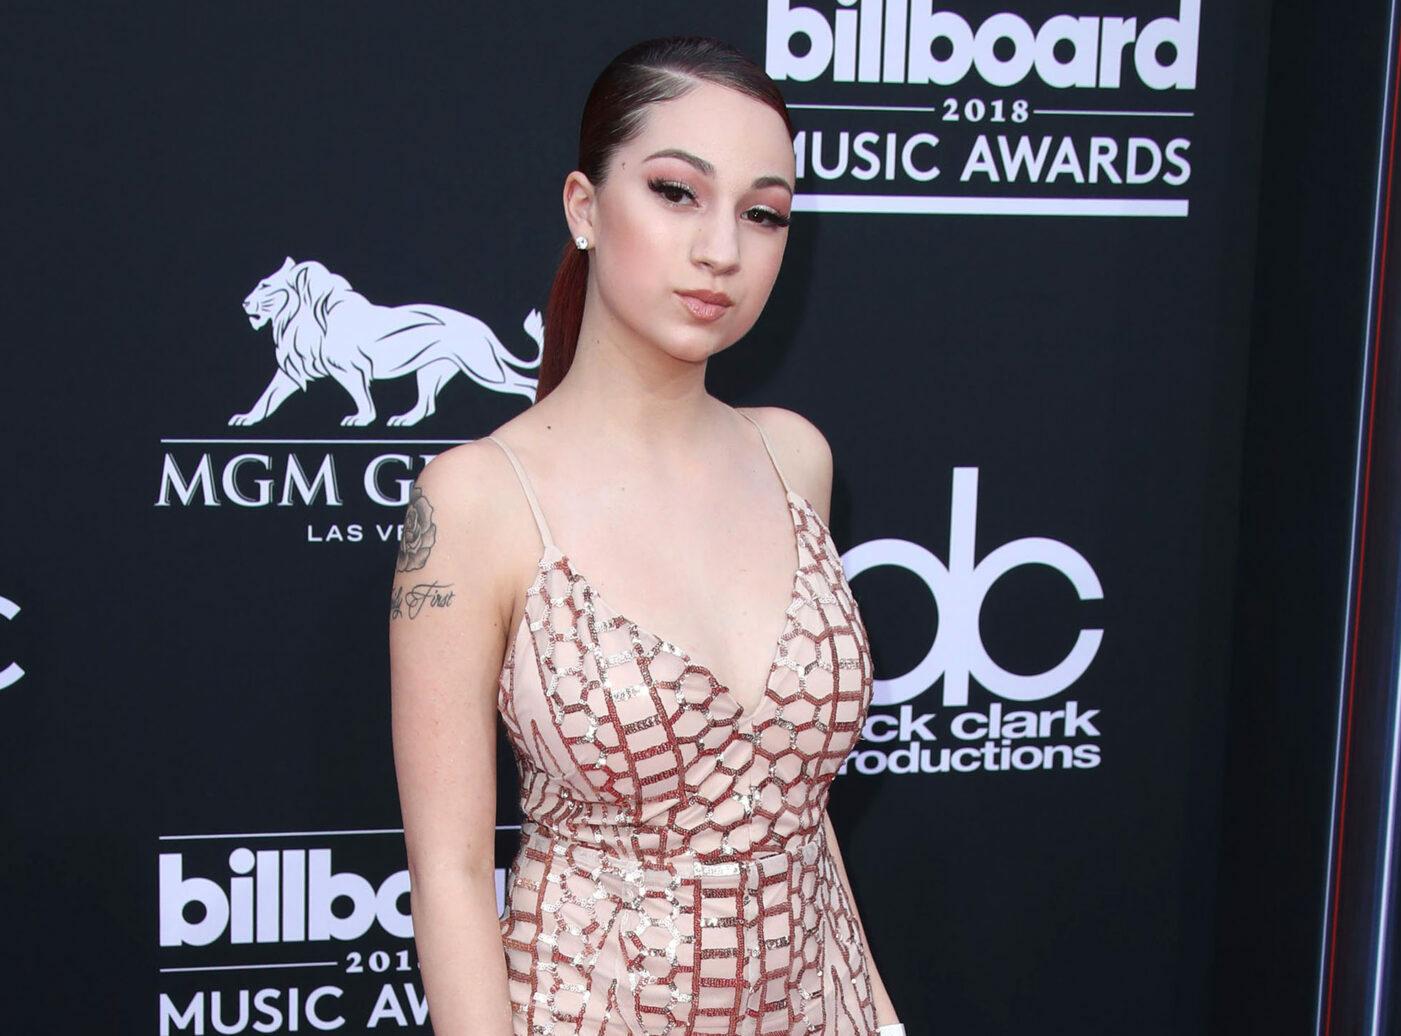 2018 Billboard Music Awards held at the MGM Grand Garden Arena on May 20, 2018 in Las Vegas, NV. 20 May 2018 Pictured: Bhad Bhabie